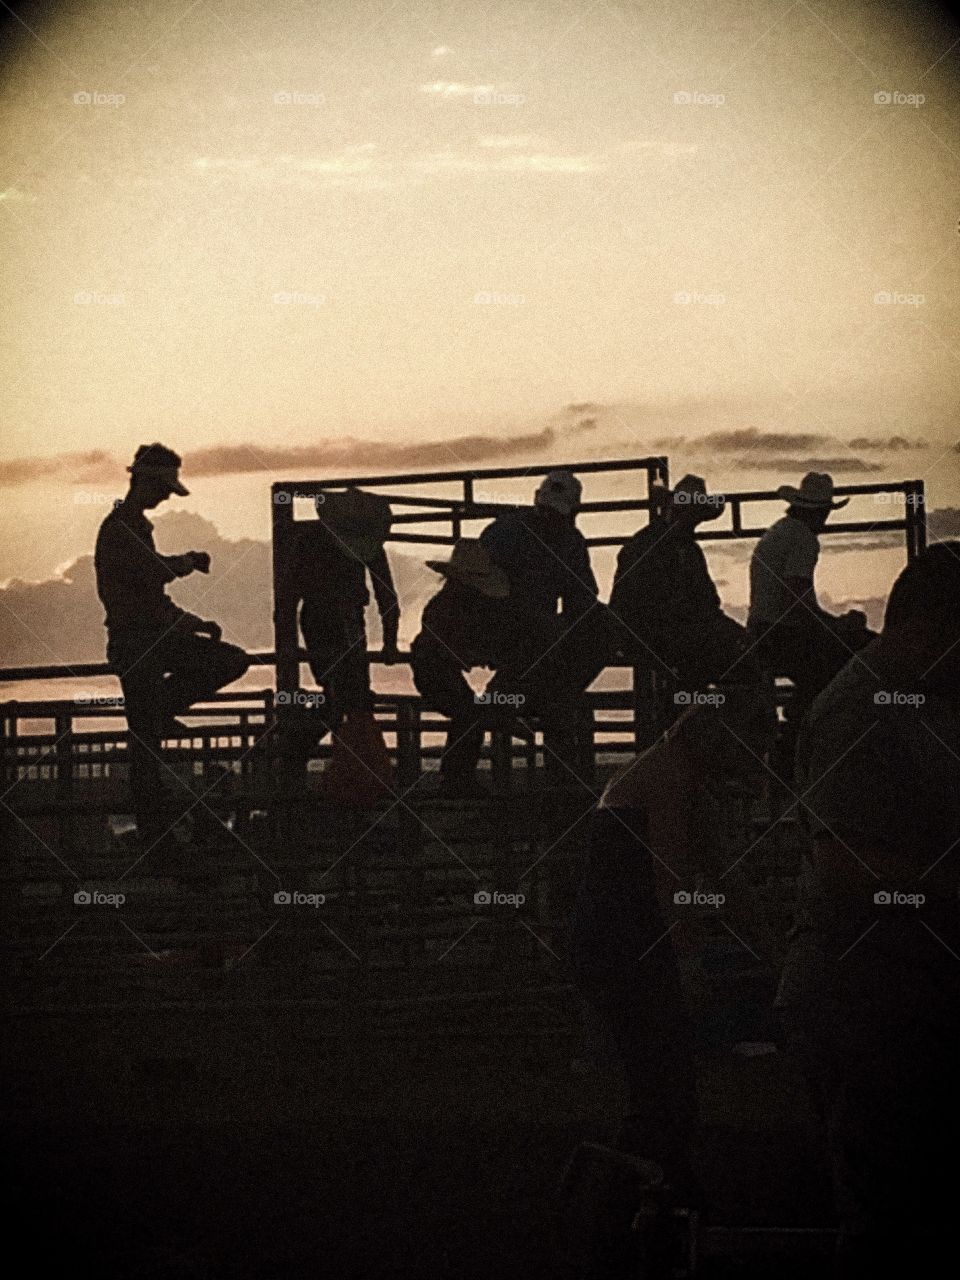 This picture has always been a favorite and taken at the Arapahoe County Fairgrounds of the cowboys 